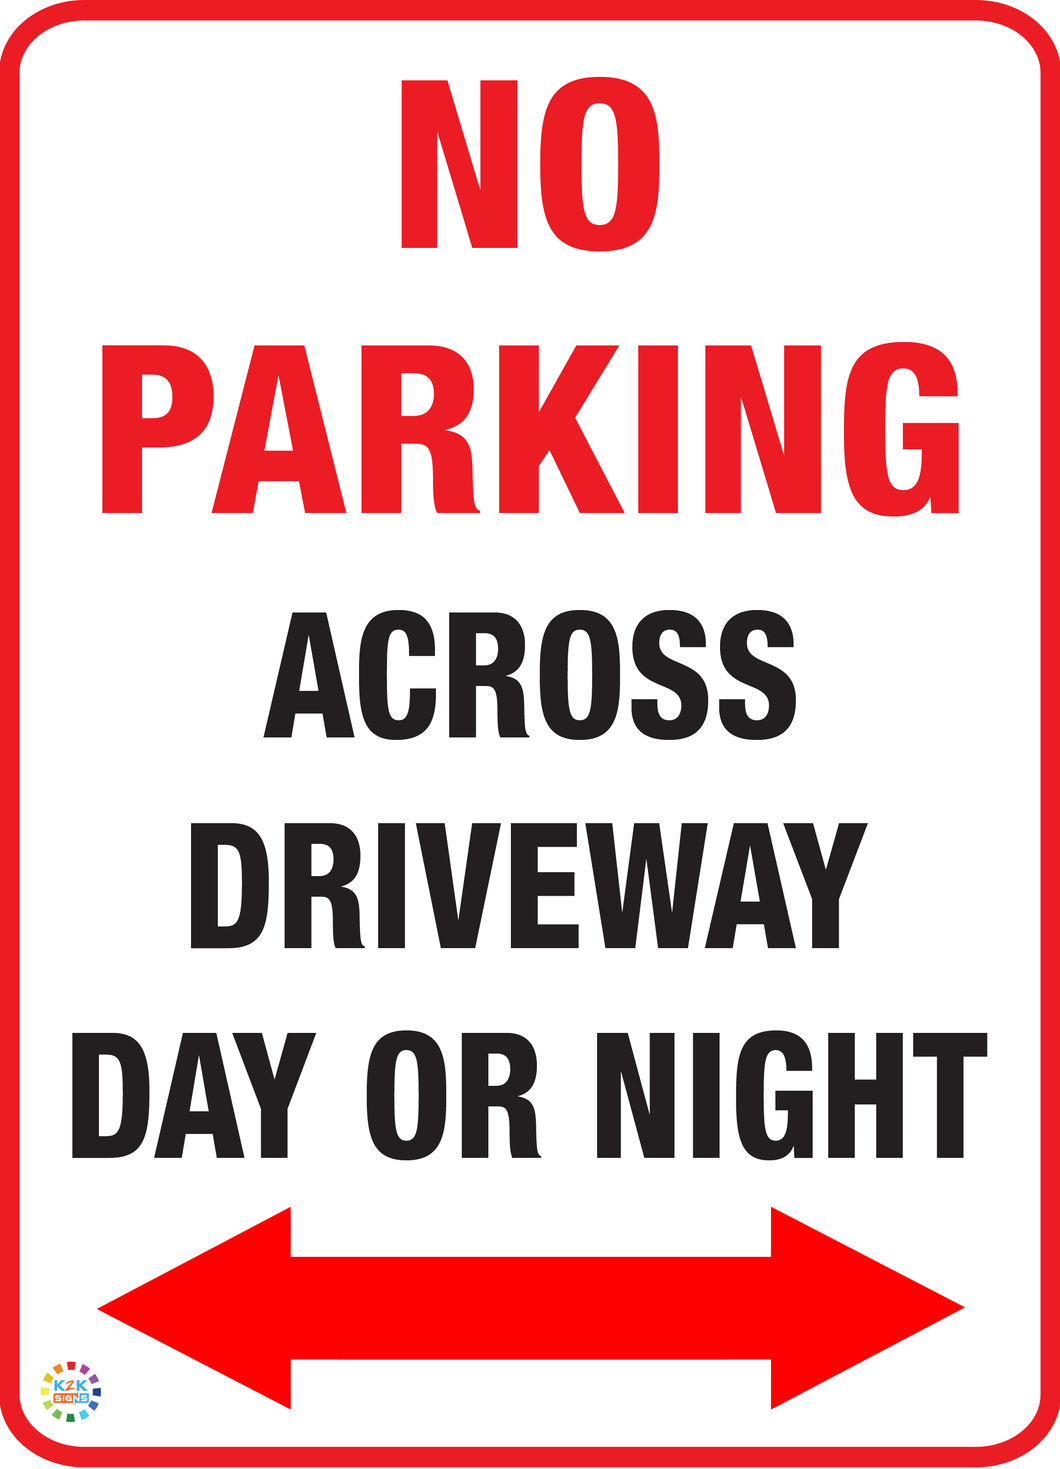 No Parking Across Driveway (Day or Night) Sign